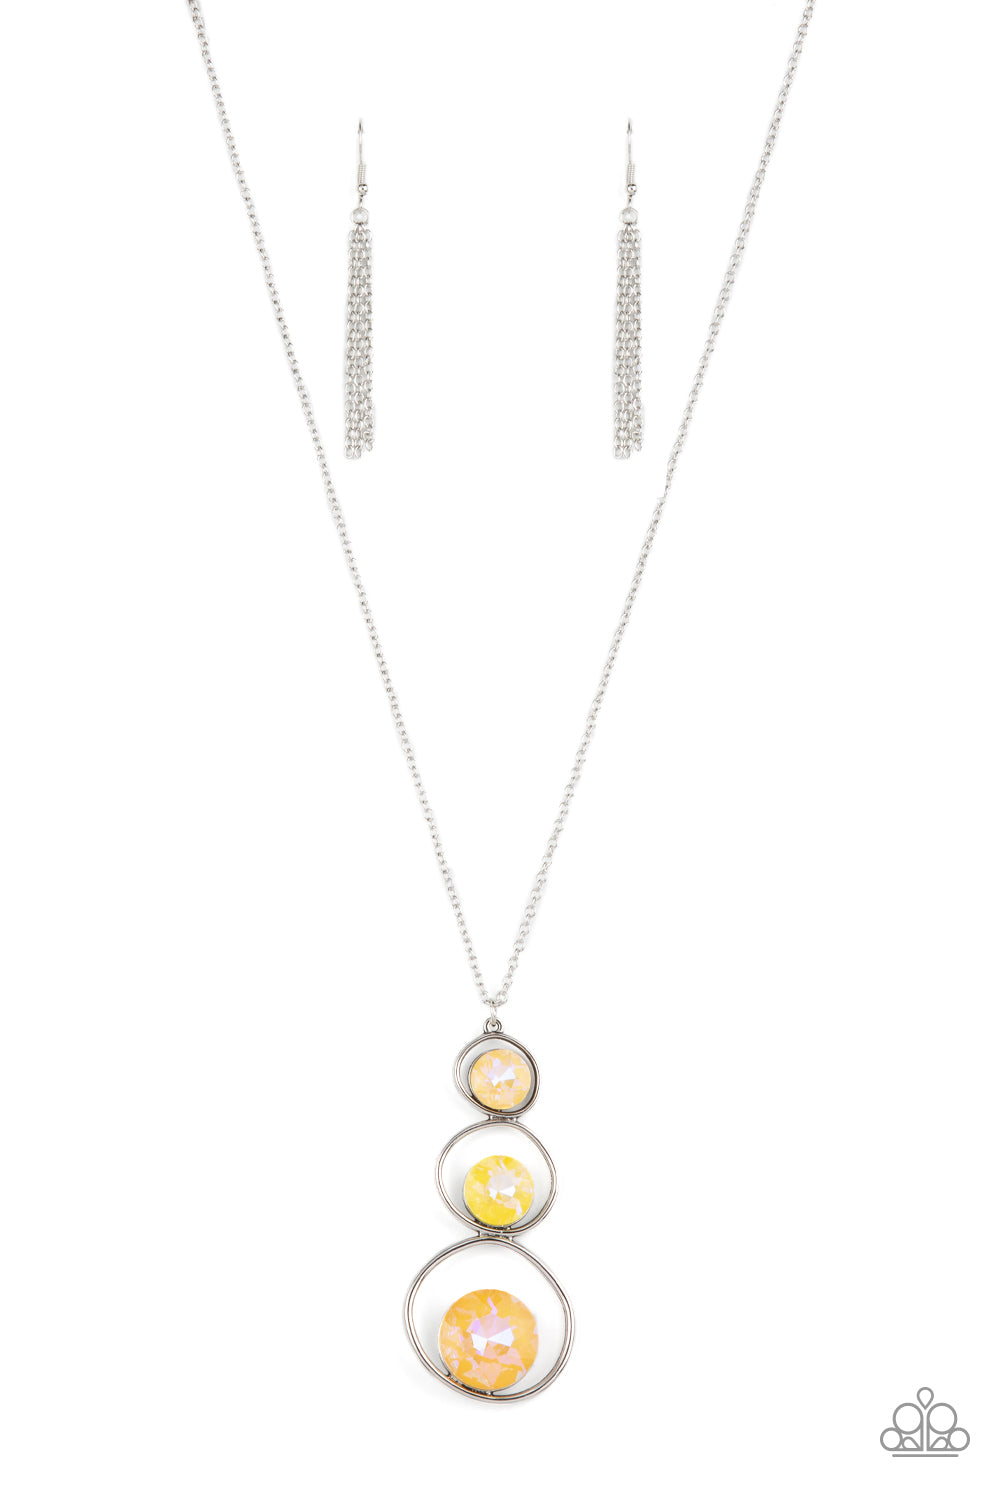 Paparazzi Necklace - Celestial Courtier - Yellow